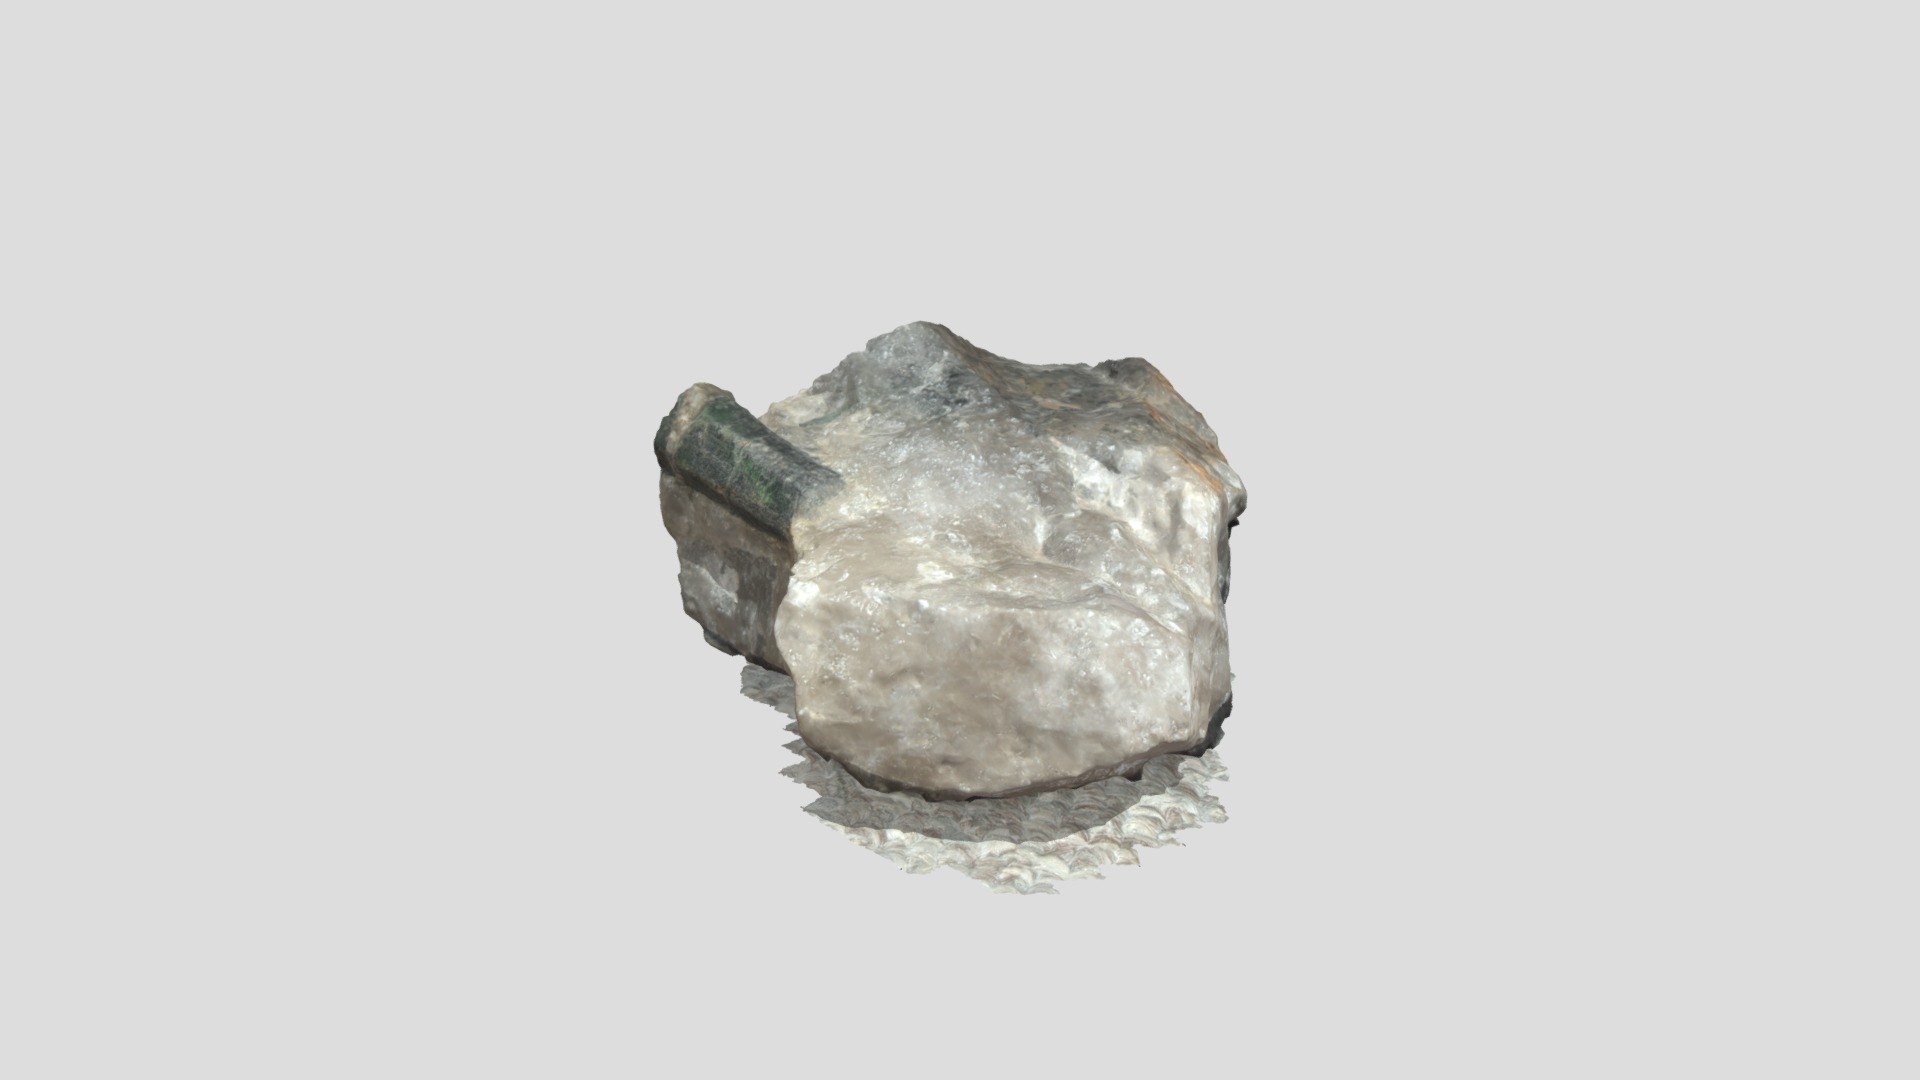 3D model Photoscanned Emerald in Quartz - This is a 3D model of the Photoscanned Emerald in Quartz. The 3D model is about a rock with a dark speckled surface.